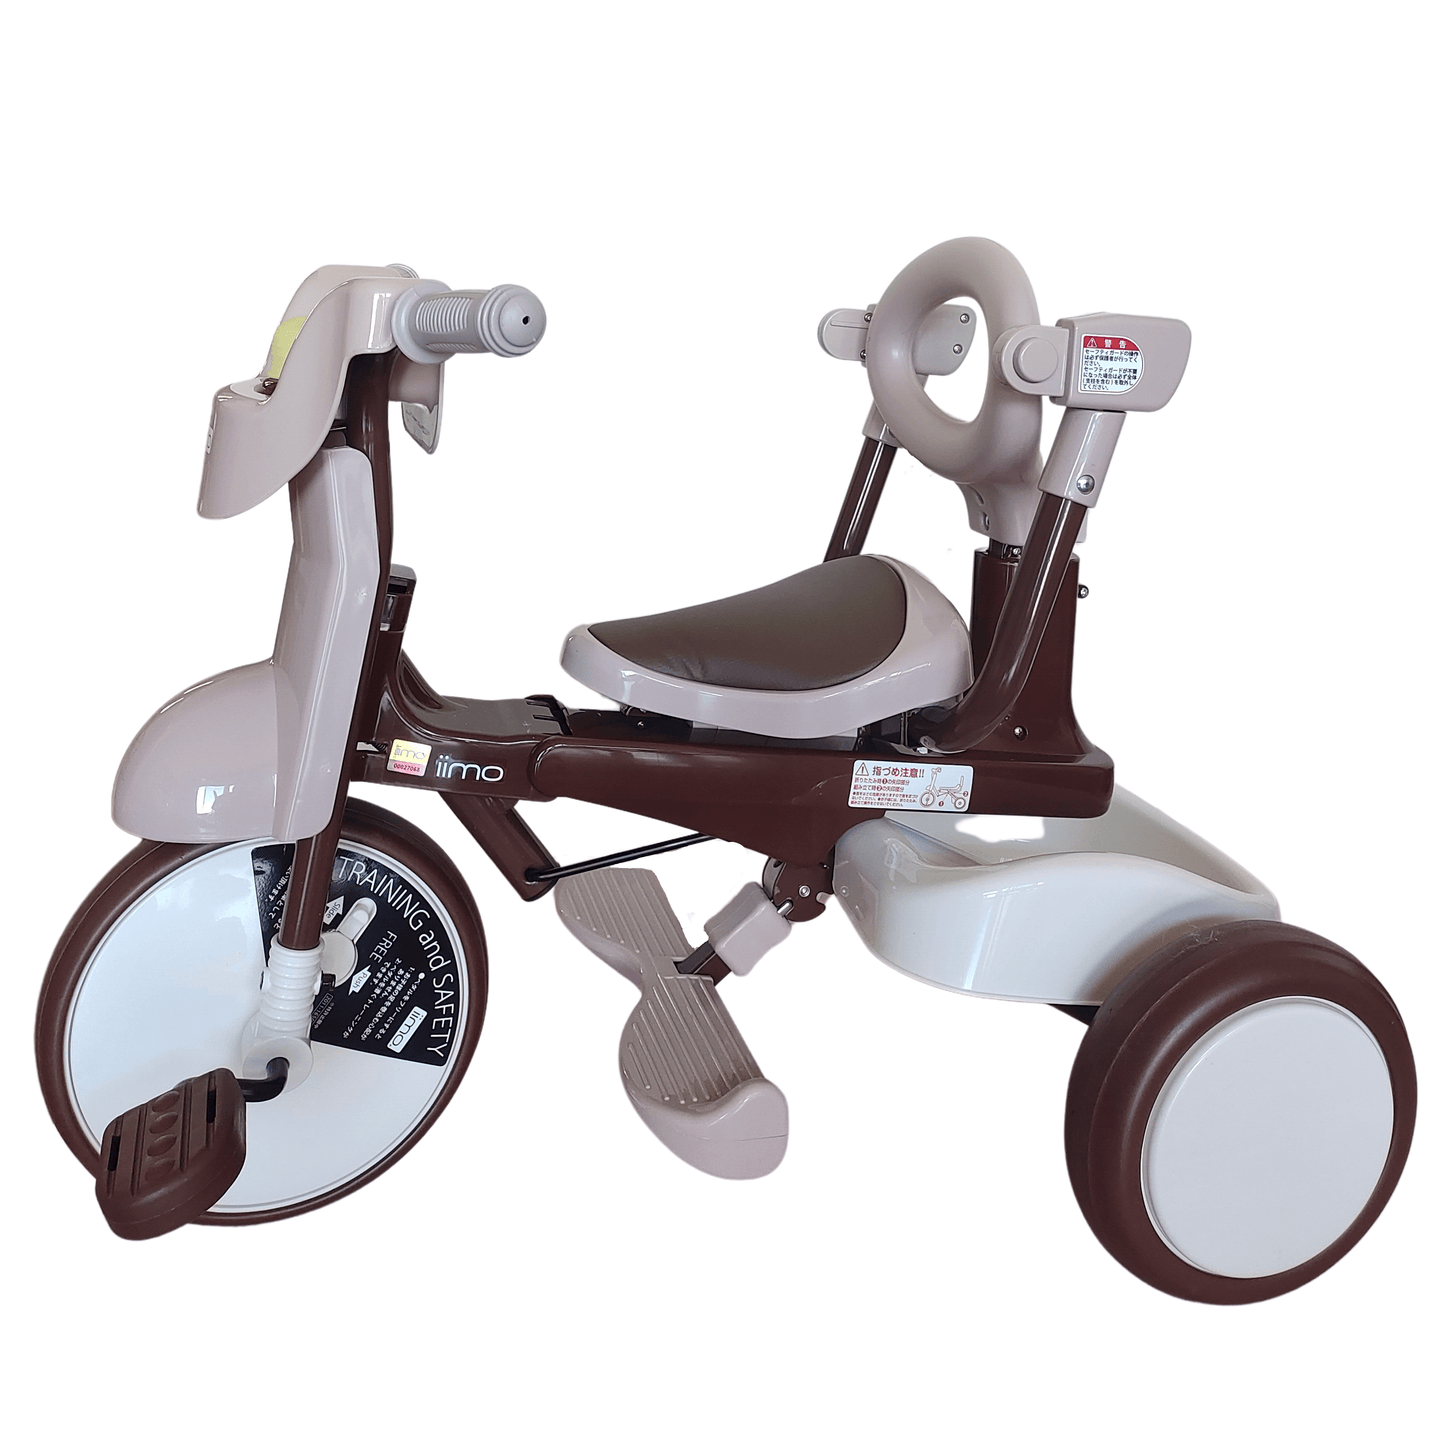 3-In-1 Foldable Tricycle With Canopy